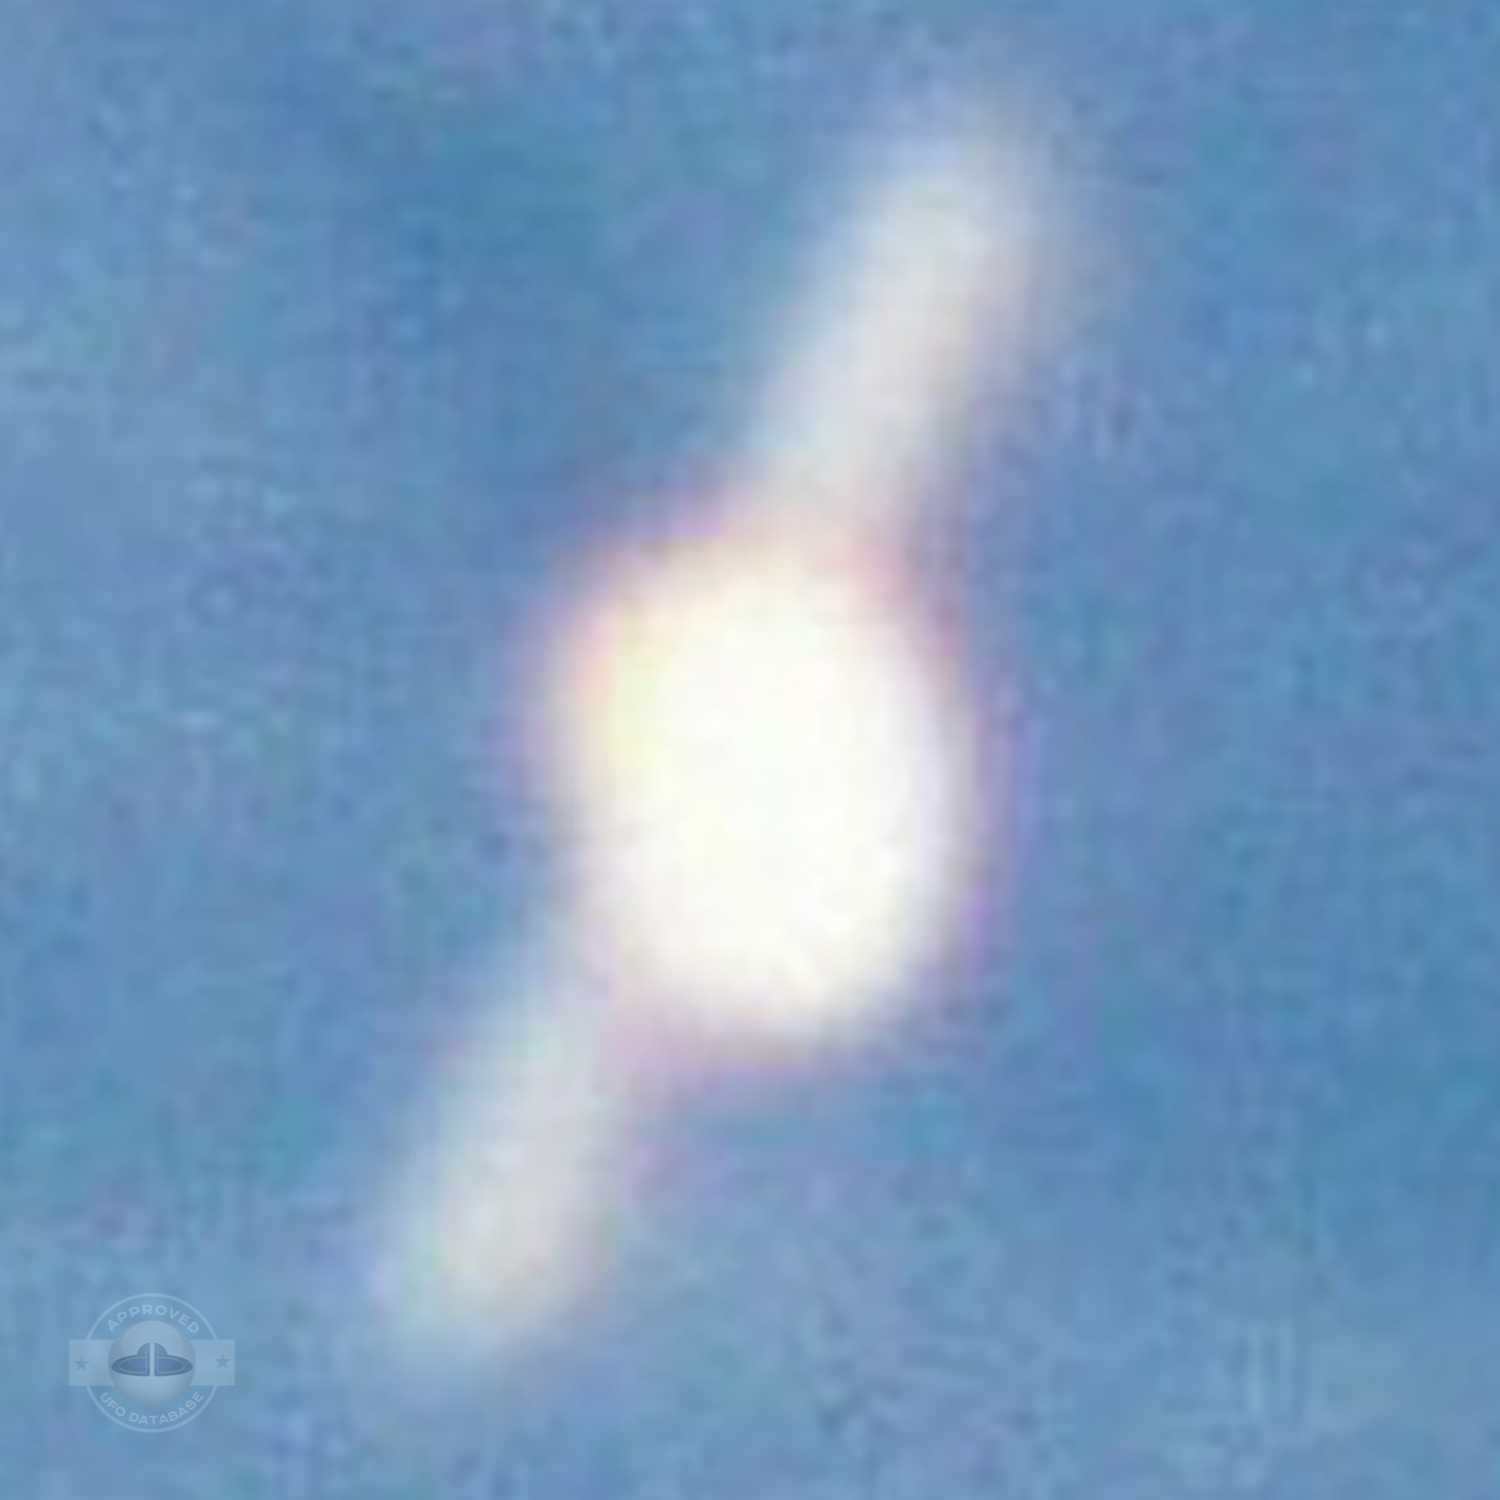 Bright Winged UFO seen passing by extremely fast in Yongzhou | China UFO Picture #208-5